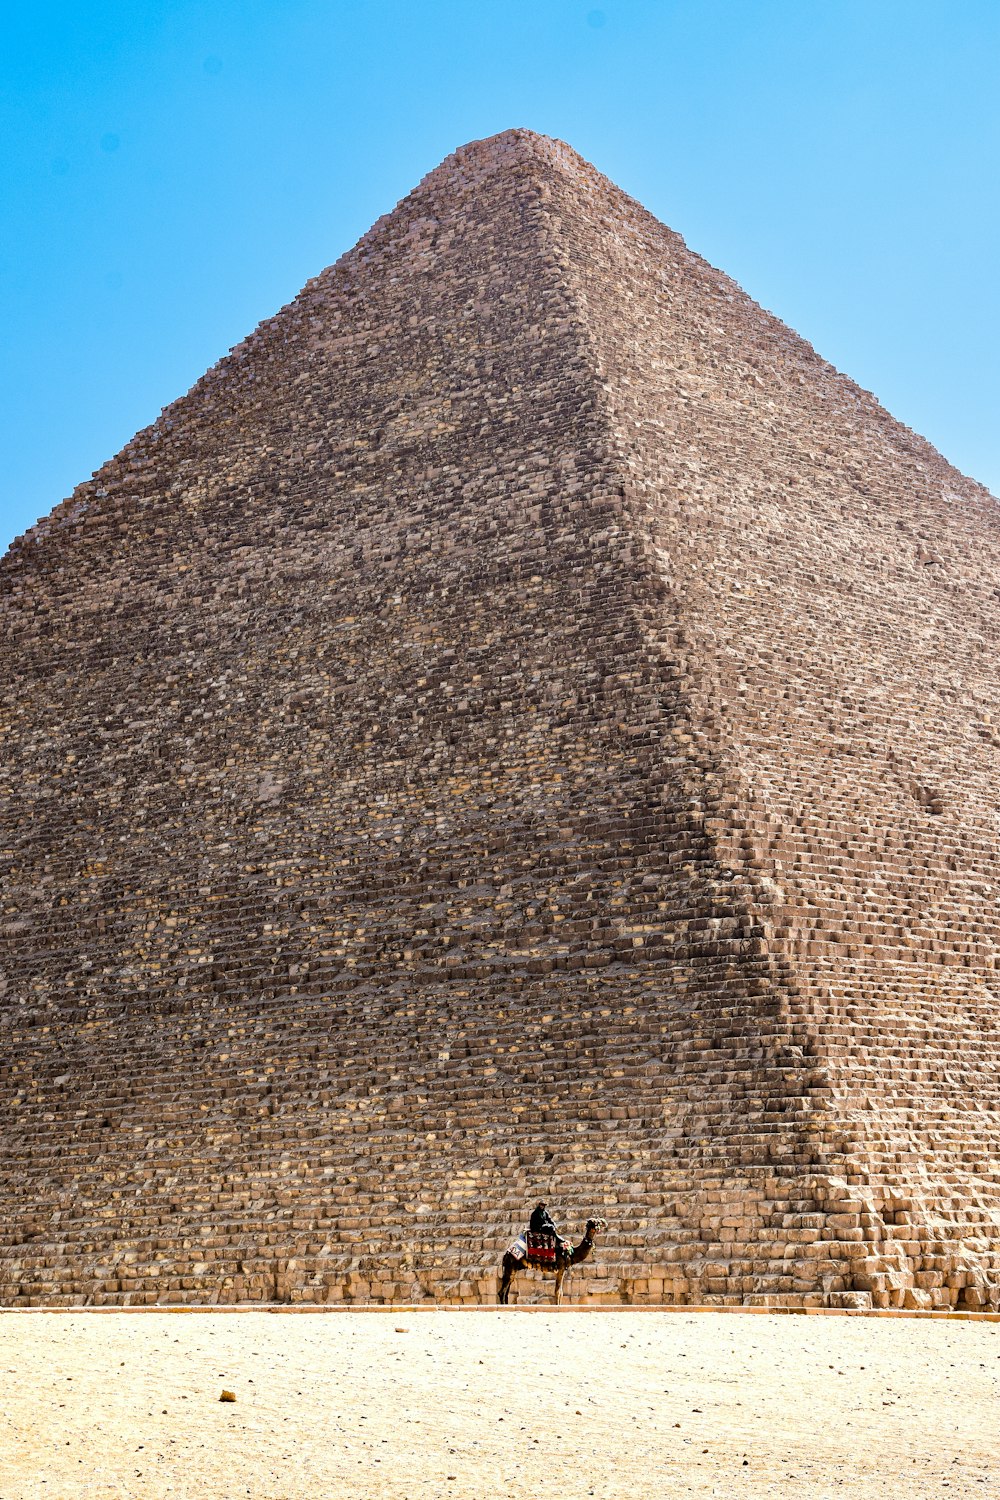 a person riding a camel in front of a pyramid with Great Pyramid of Giza in the background